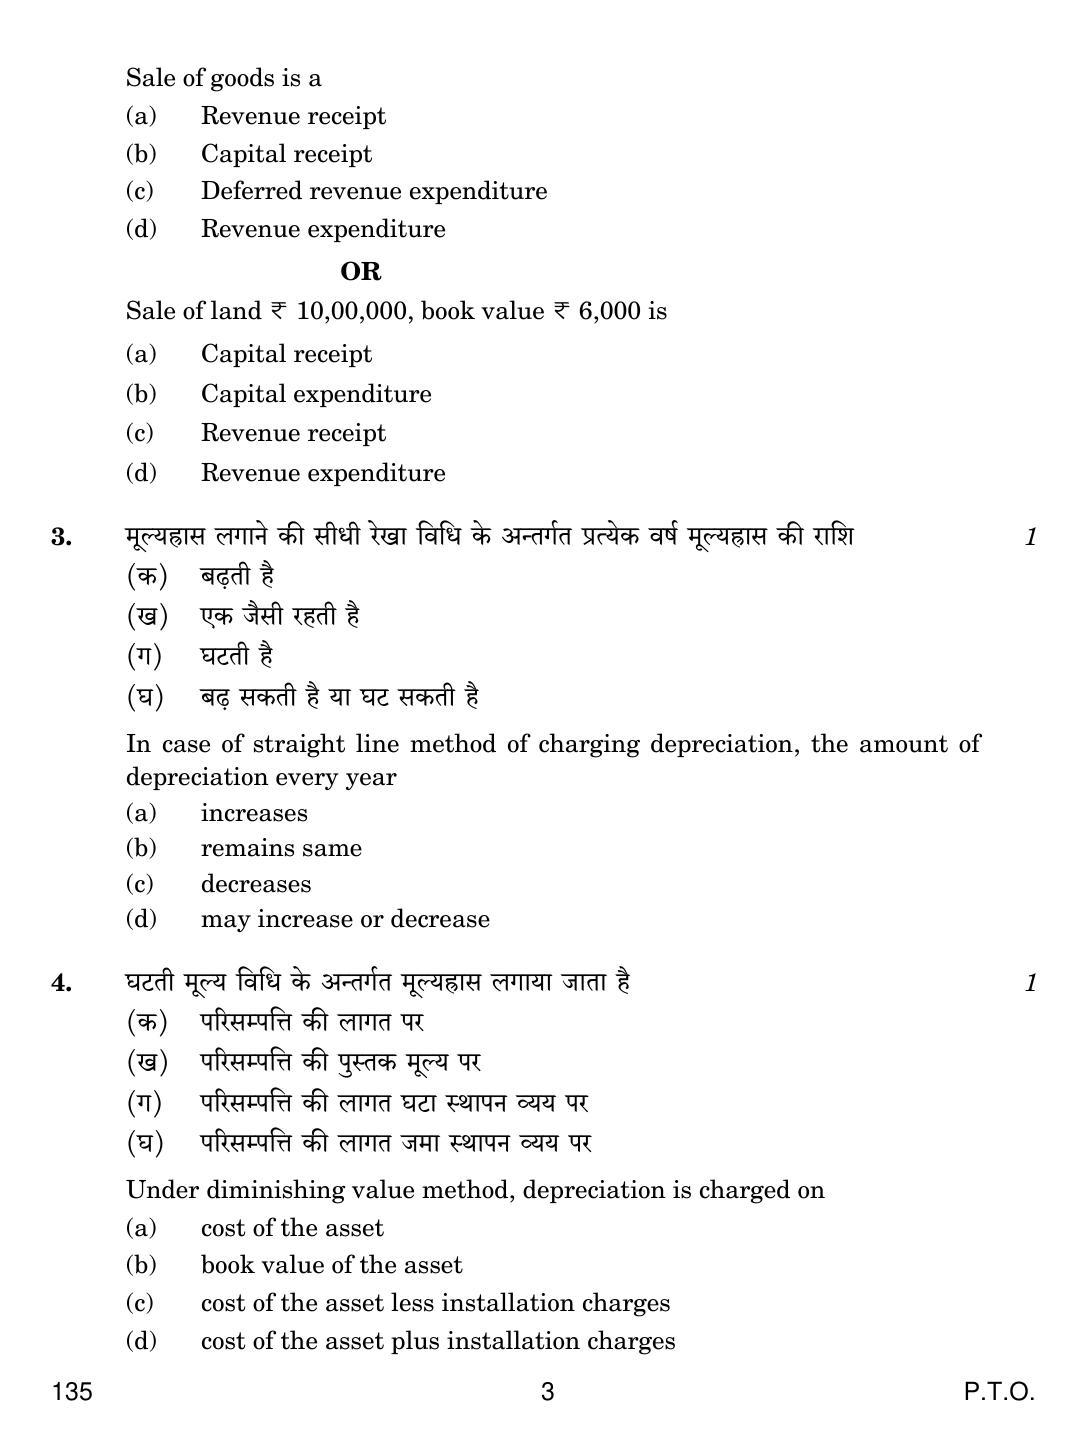 CBSE Class 10 135 ELEMENTS OF BOOK-KEEPING AND ACCOUNTANCY (COMMERCE) 2019 Question Paper - Page 3